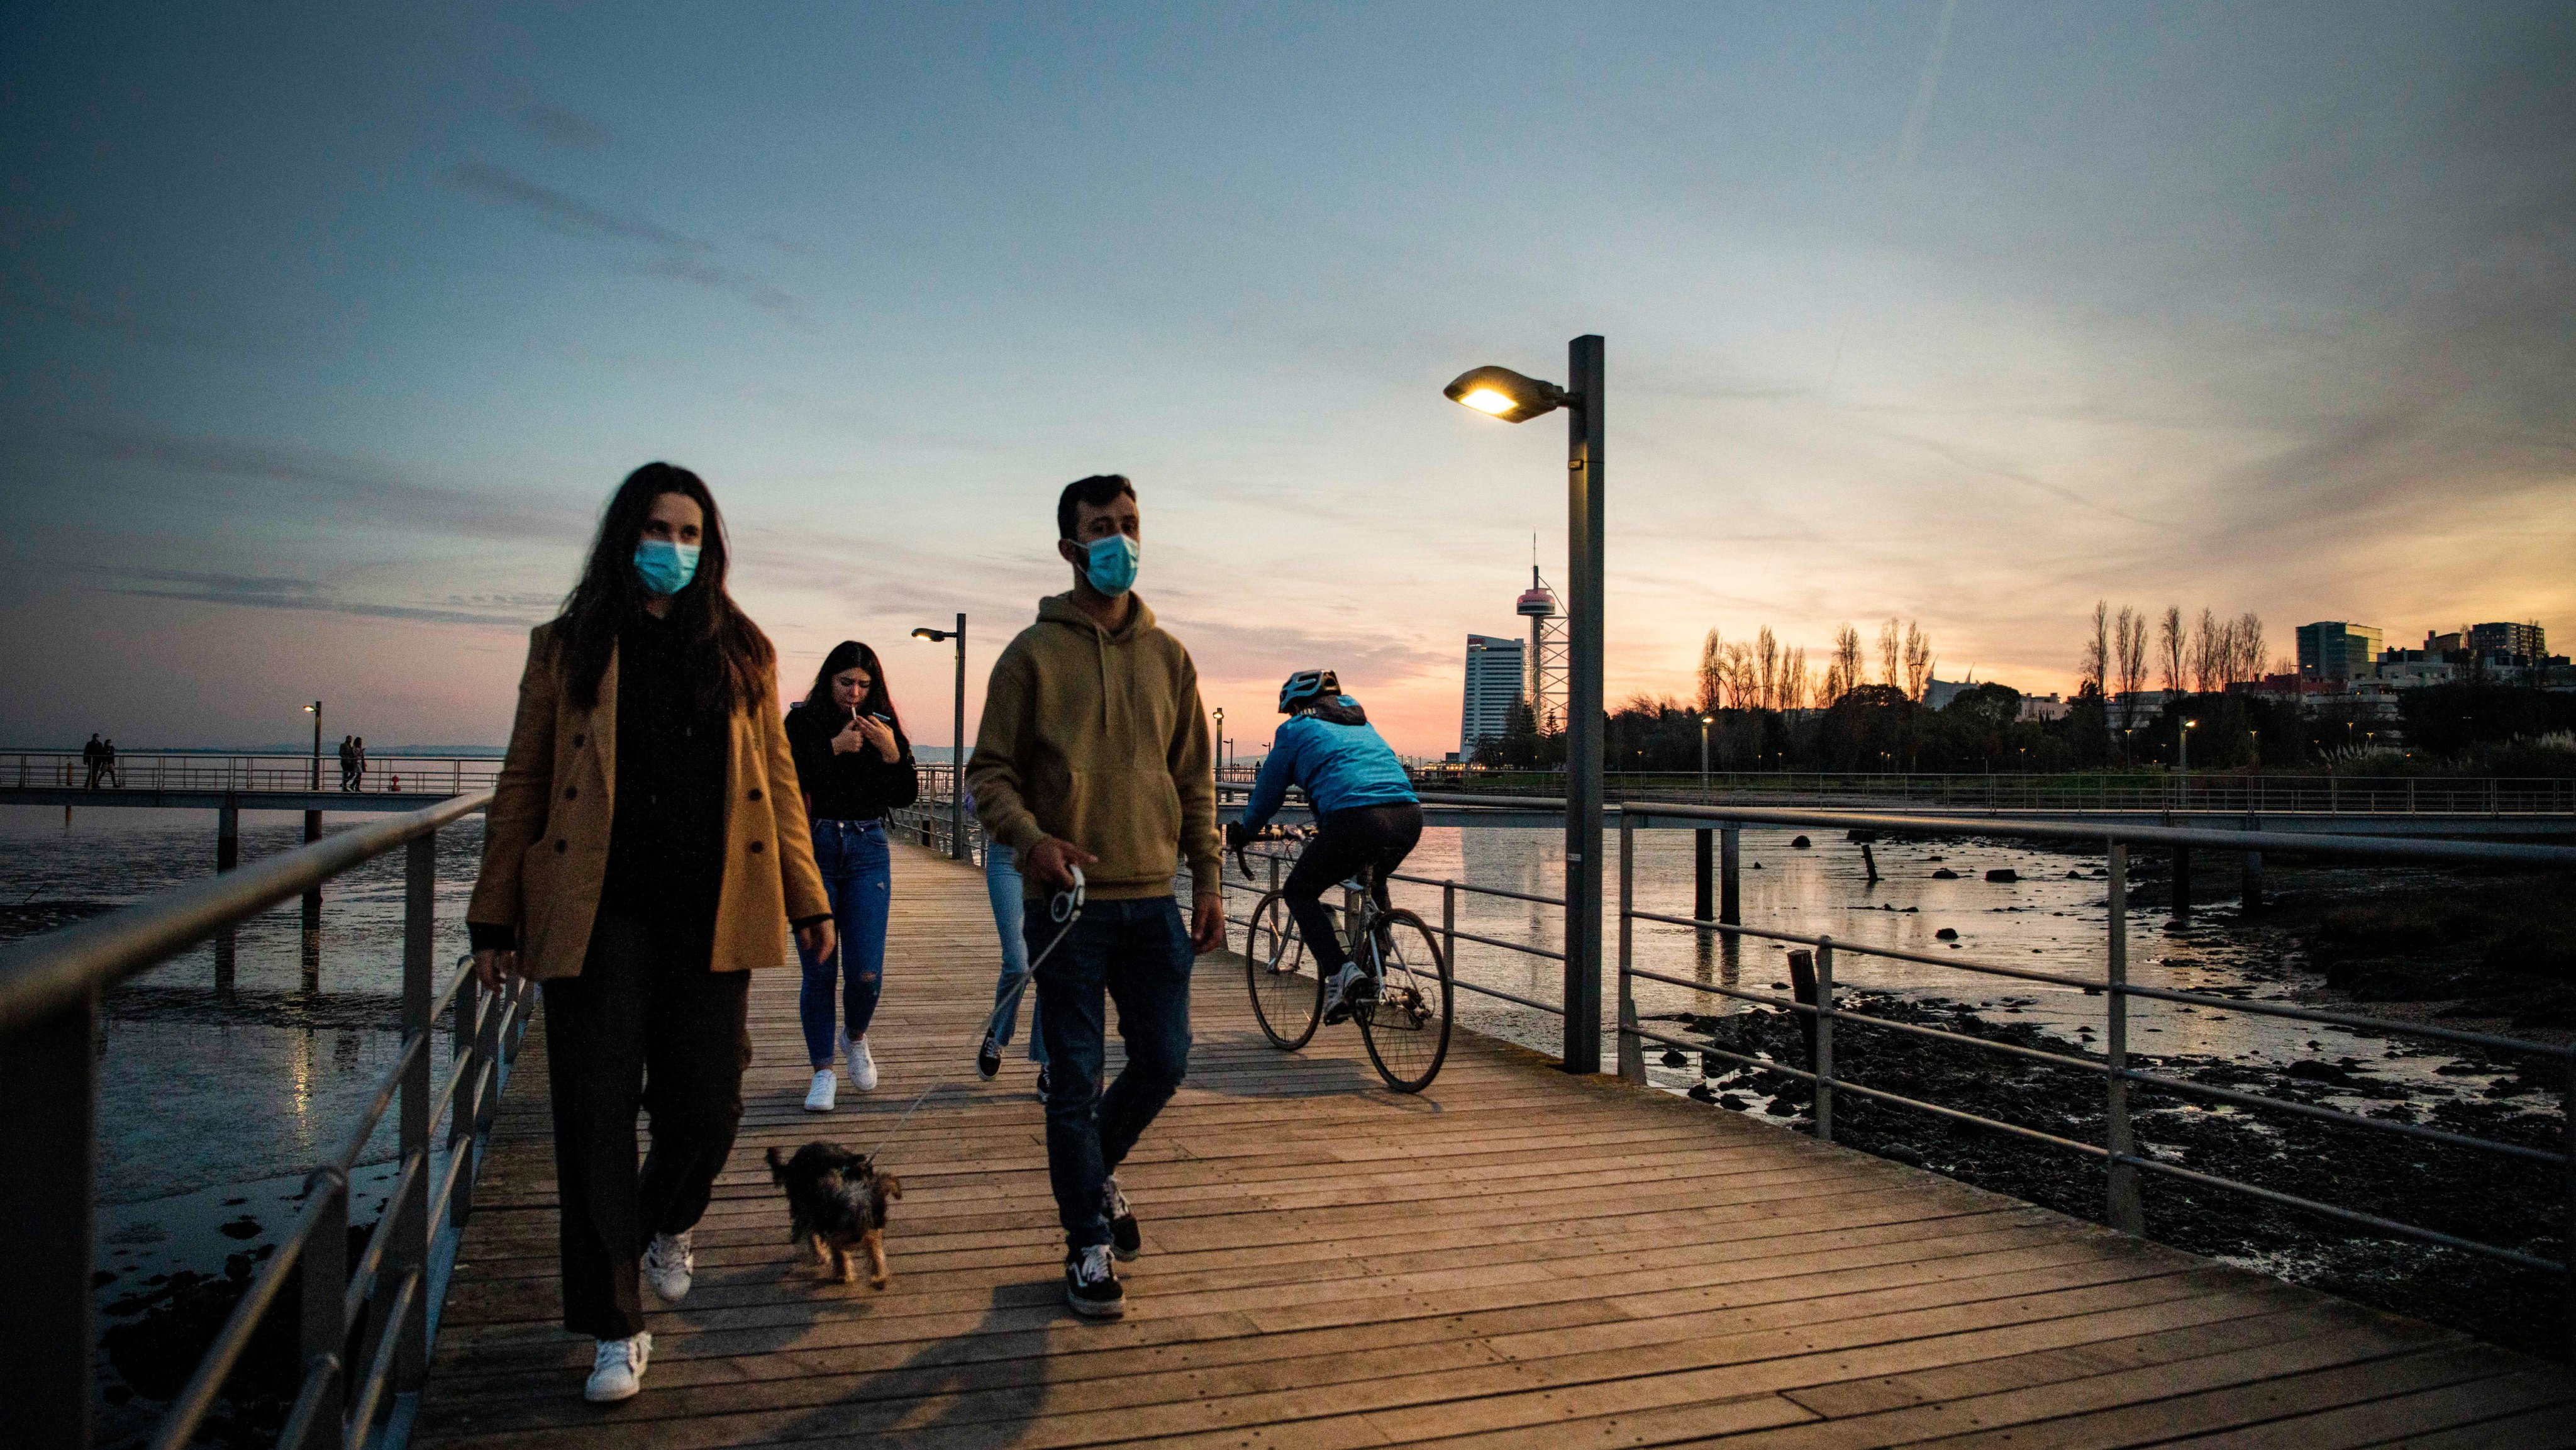 People wearing face masks are seen walking along the Tagus